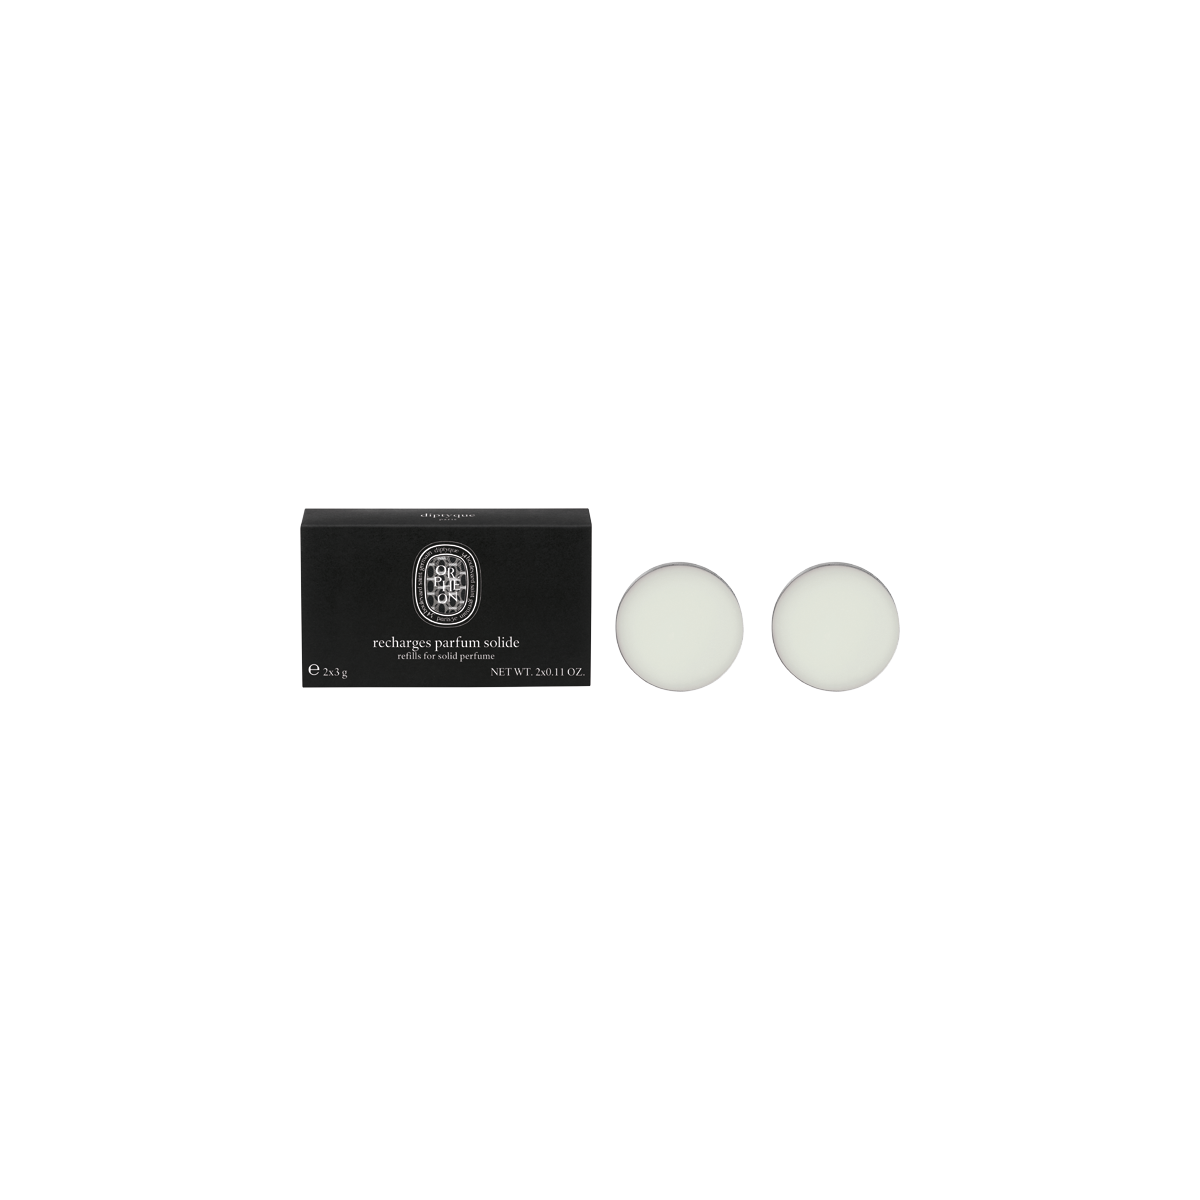 Diptyque - Orpheon Solid Perfume Refill